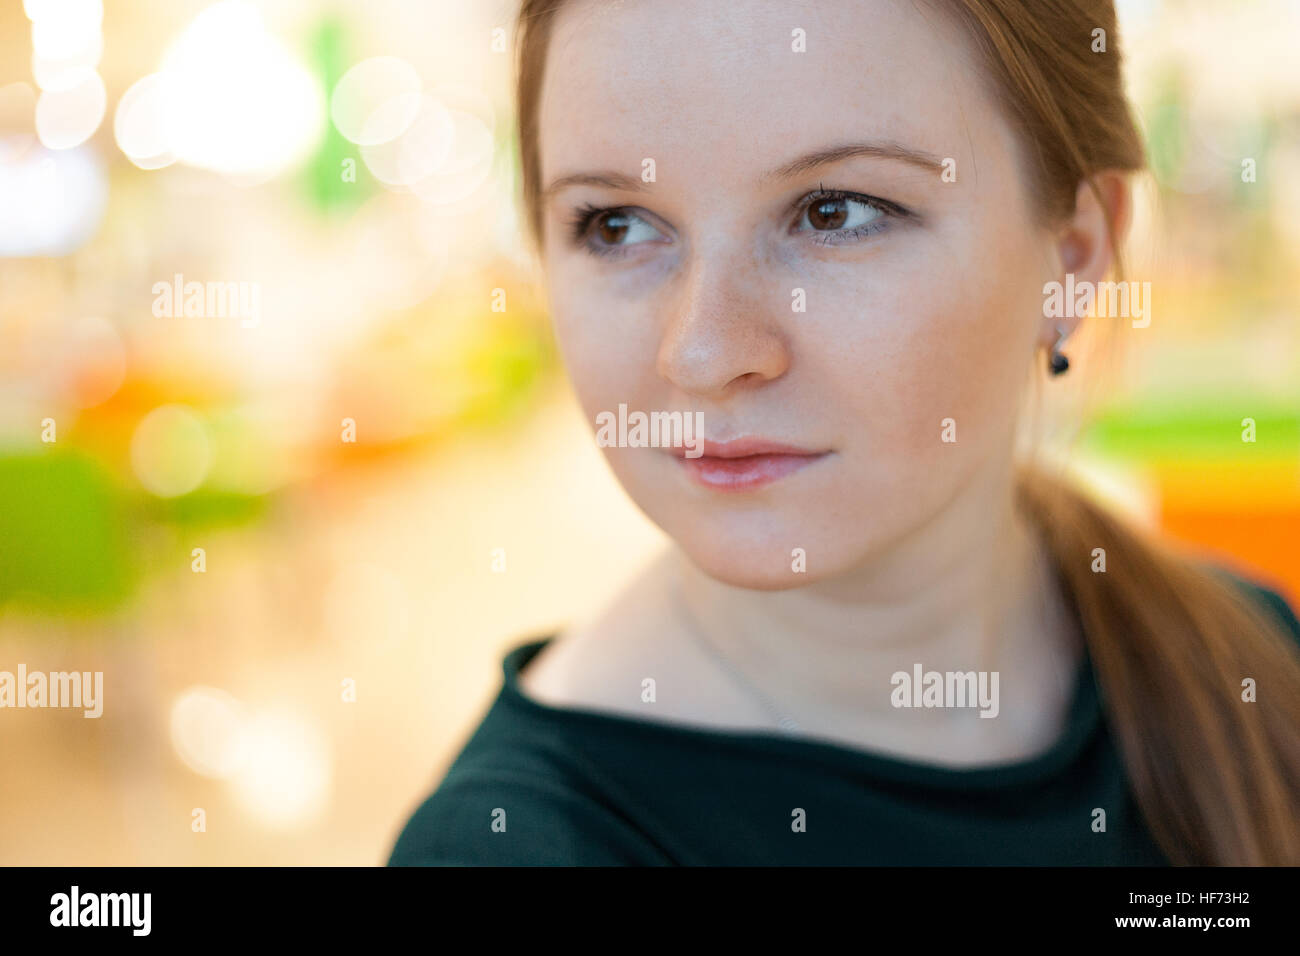 indoor portrait of young woman Stock Photo